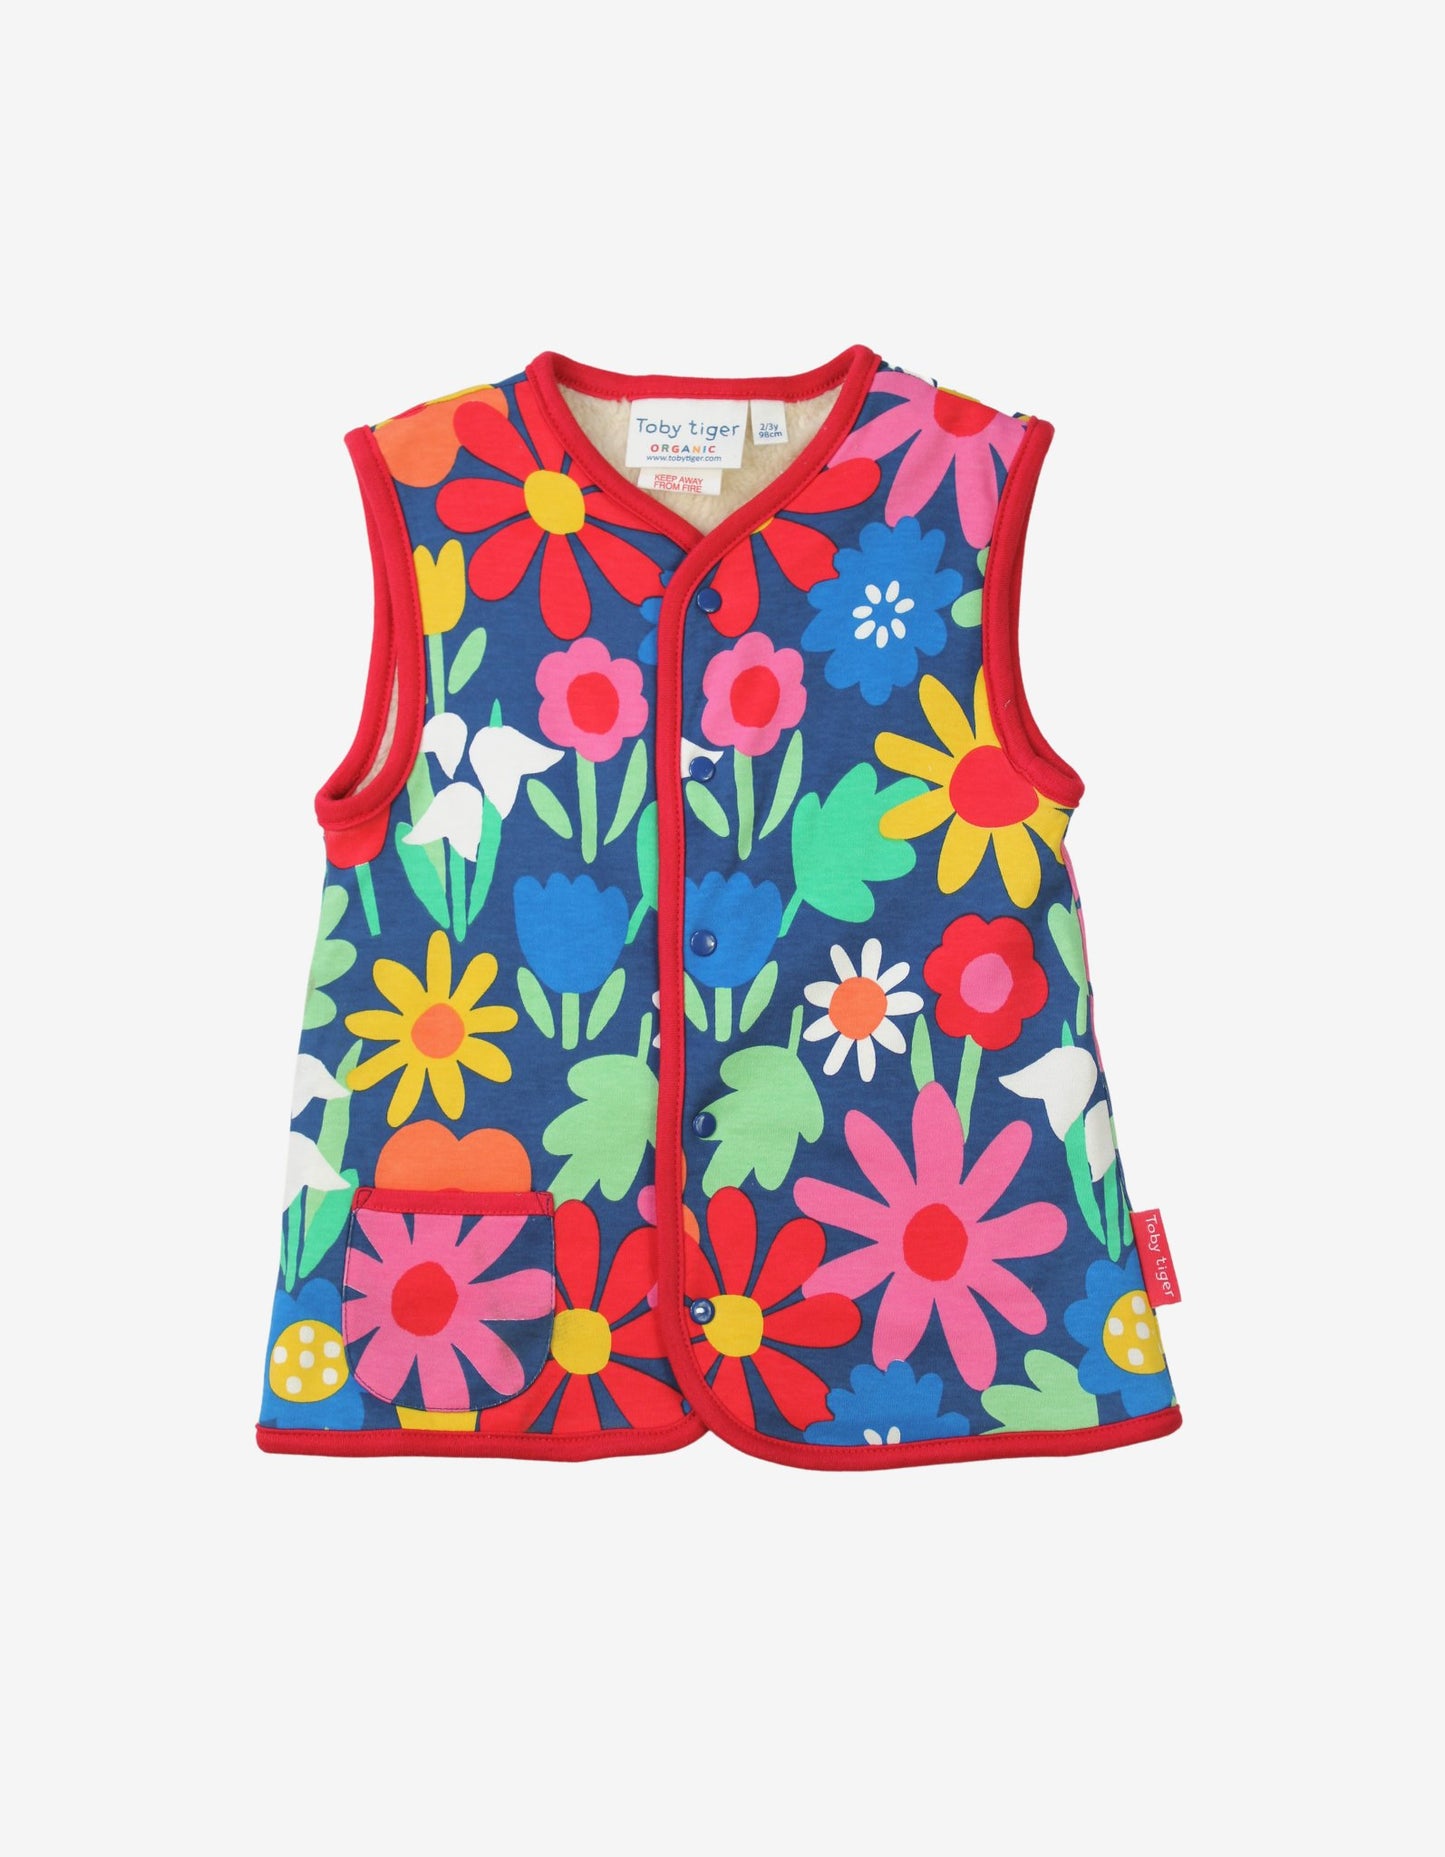 Organic Bold Floral Reversible Gilet - Toby Tiger